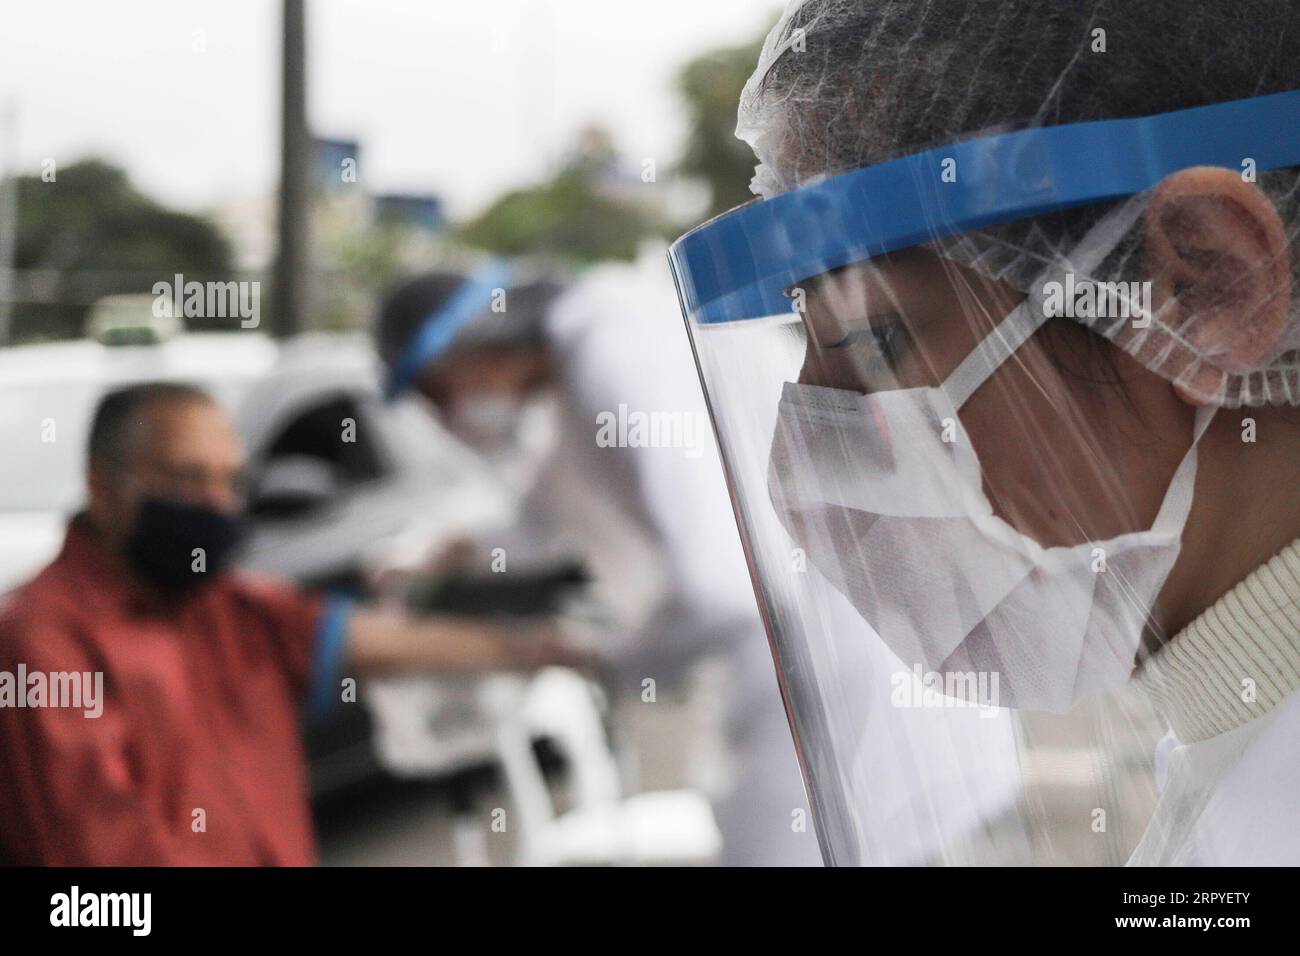 200628 -- BEIJING, June 28, 2020 -- Medical workers in personal protective equipment are on duty to perform COVID-19 rapid tests for taxi drivers in Sao Paolo, Brazil, June 26, 2020.  XINHUA PHOTOS OF THE DAY RahelxPatrasso PUBLICATIONxNOTxINxCHN Stock Photo